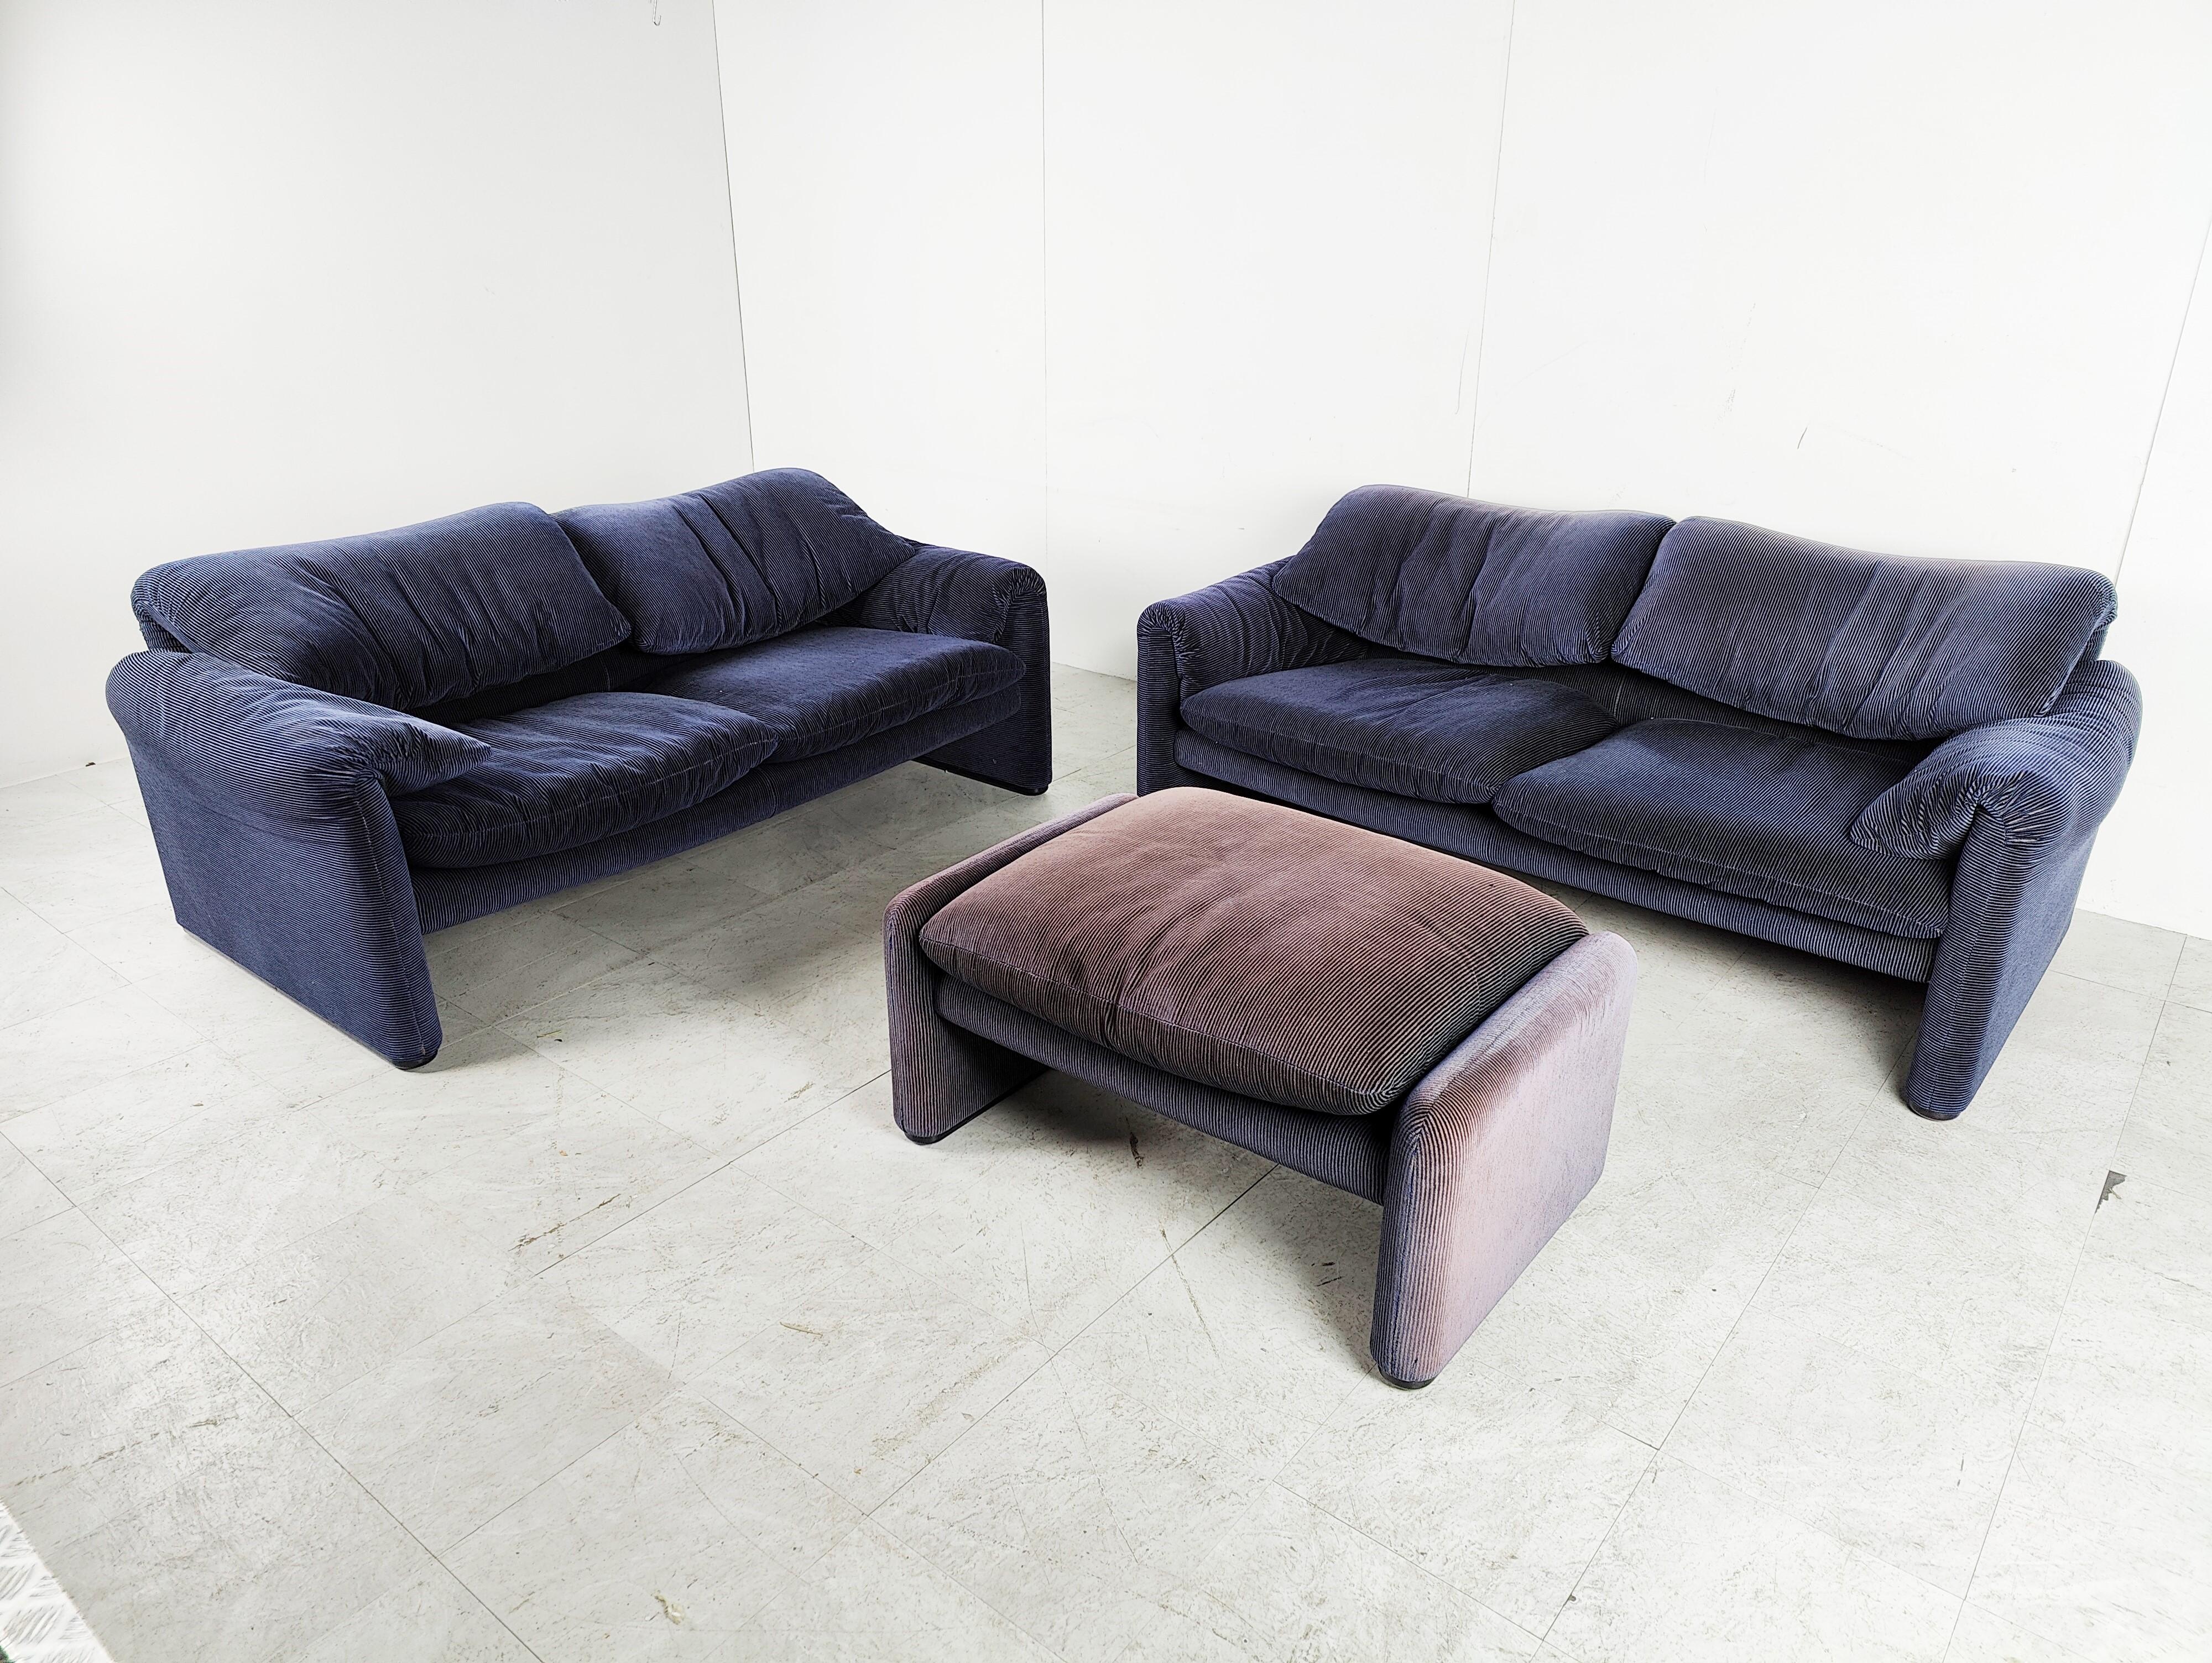 Pair of Maralunga Sofas by Vico Magistretti for Cassina, 1970s 1